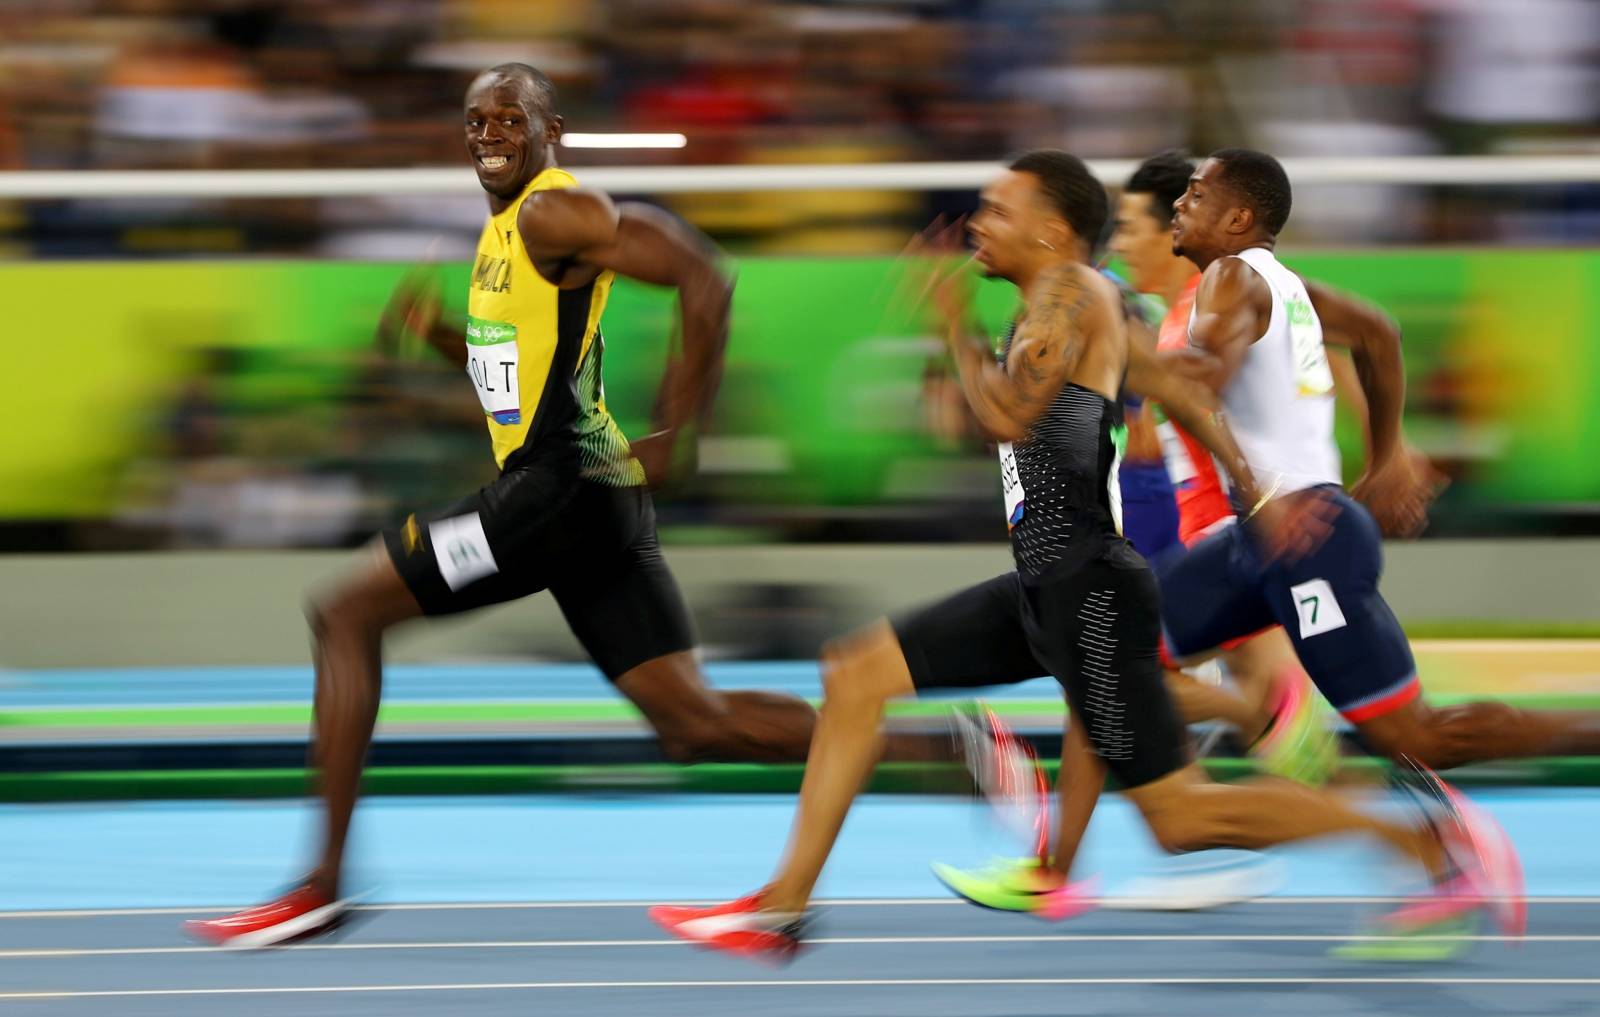 FILE PHOTO: Usain Bolt (JAM) of Jamaica looks at Andre De Grasse (CAN) of Canada as they compete in the 2016 Rio Olympics, Men's 100m Semifinals at the Olympic Stadium in Rio de Janeiro